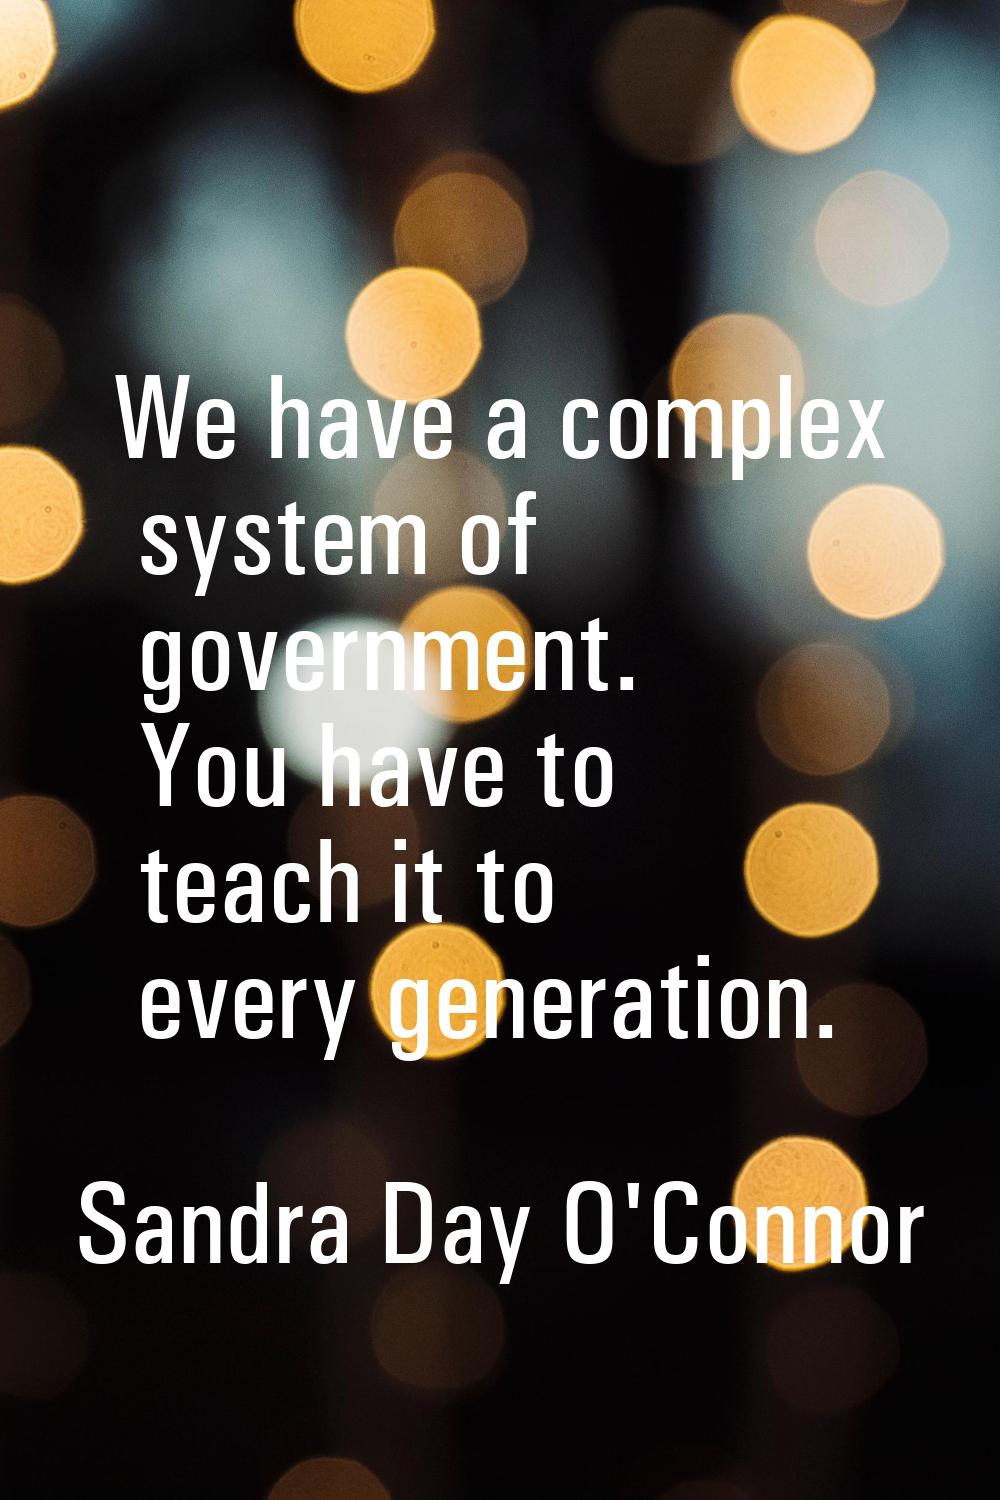 We have a complex system of government. You have to teach it to every generation.